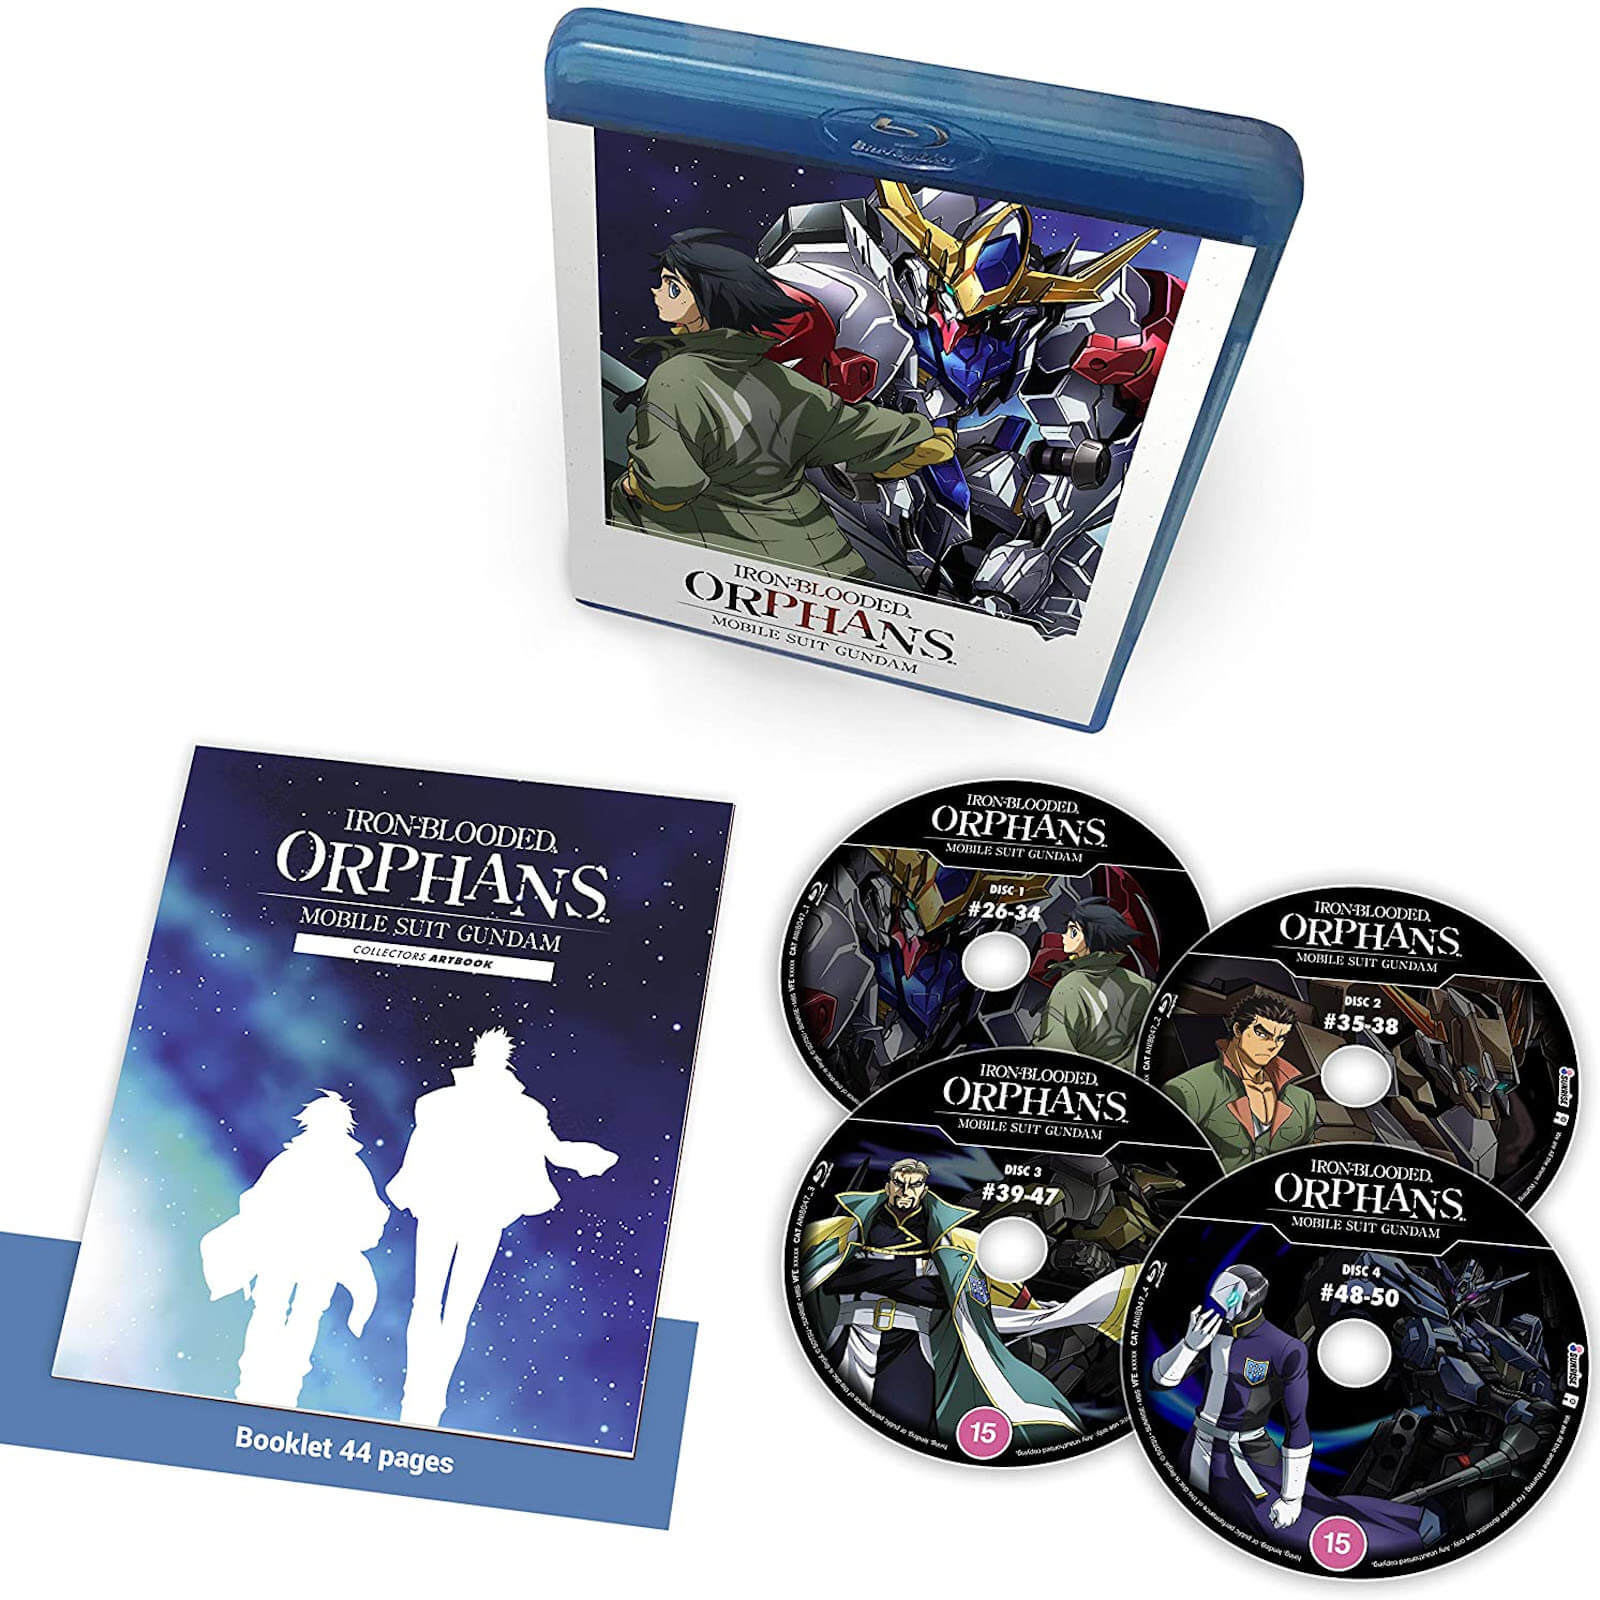 Mobile Suit Gundam Iron Blooded Orphans Part 2 Collector's Edition